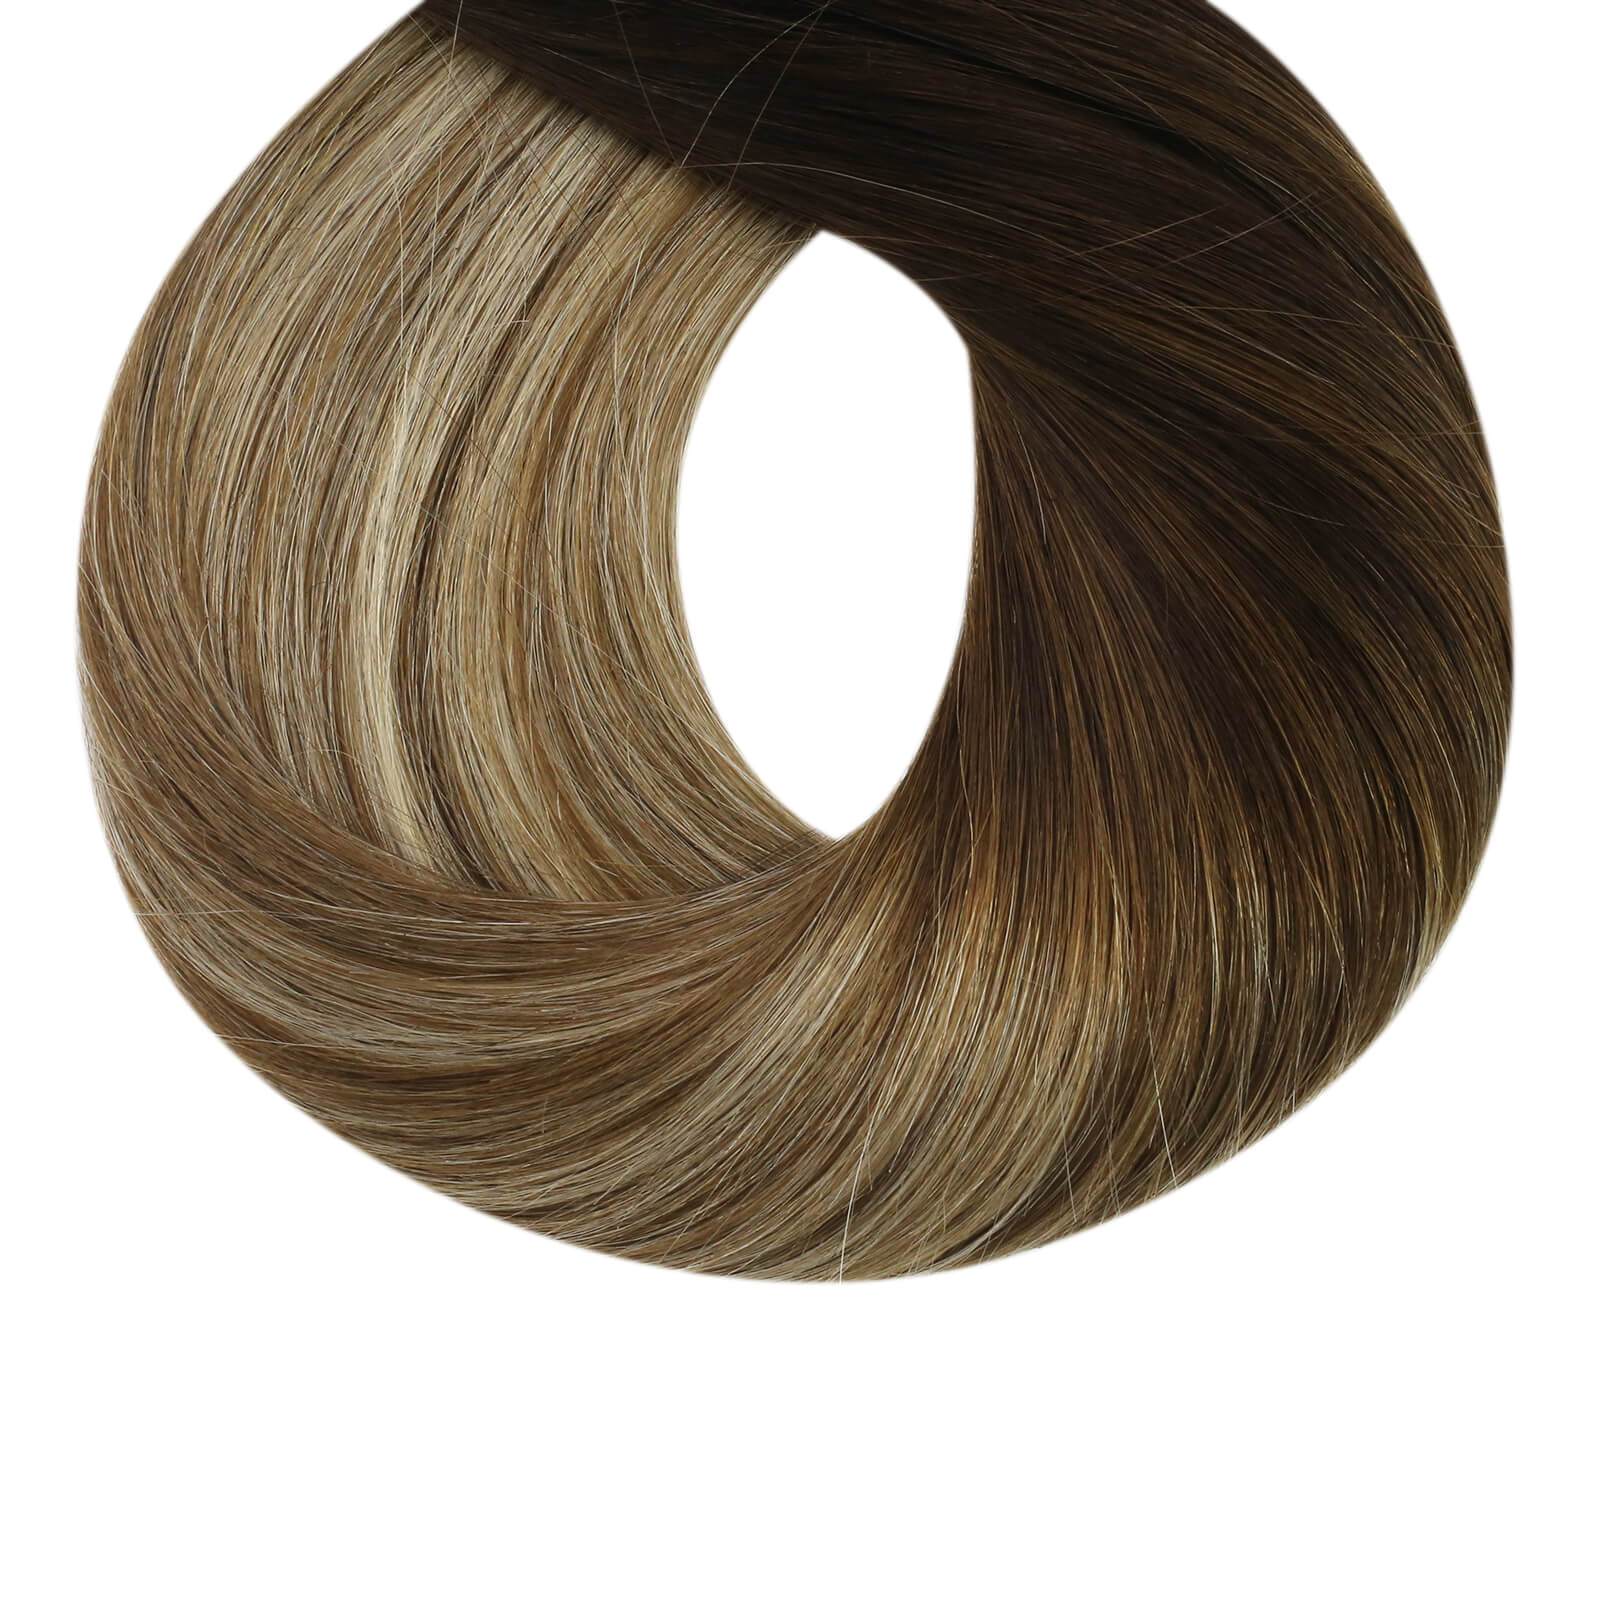 Tape Hair Extensions Human Hair 12 Inch Tape in Balayage Extensions